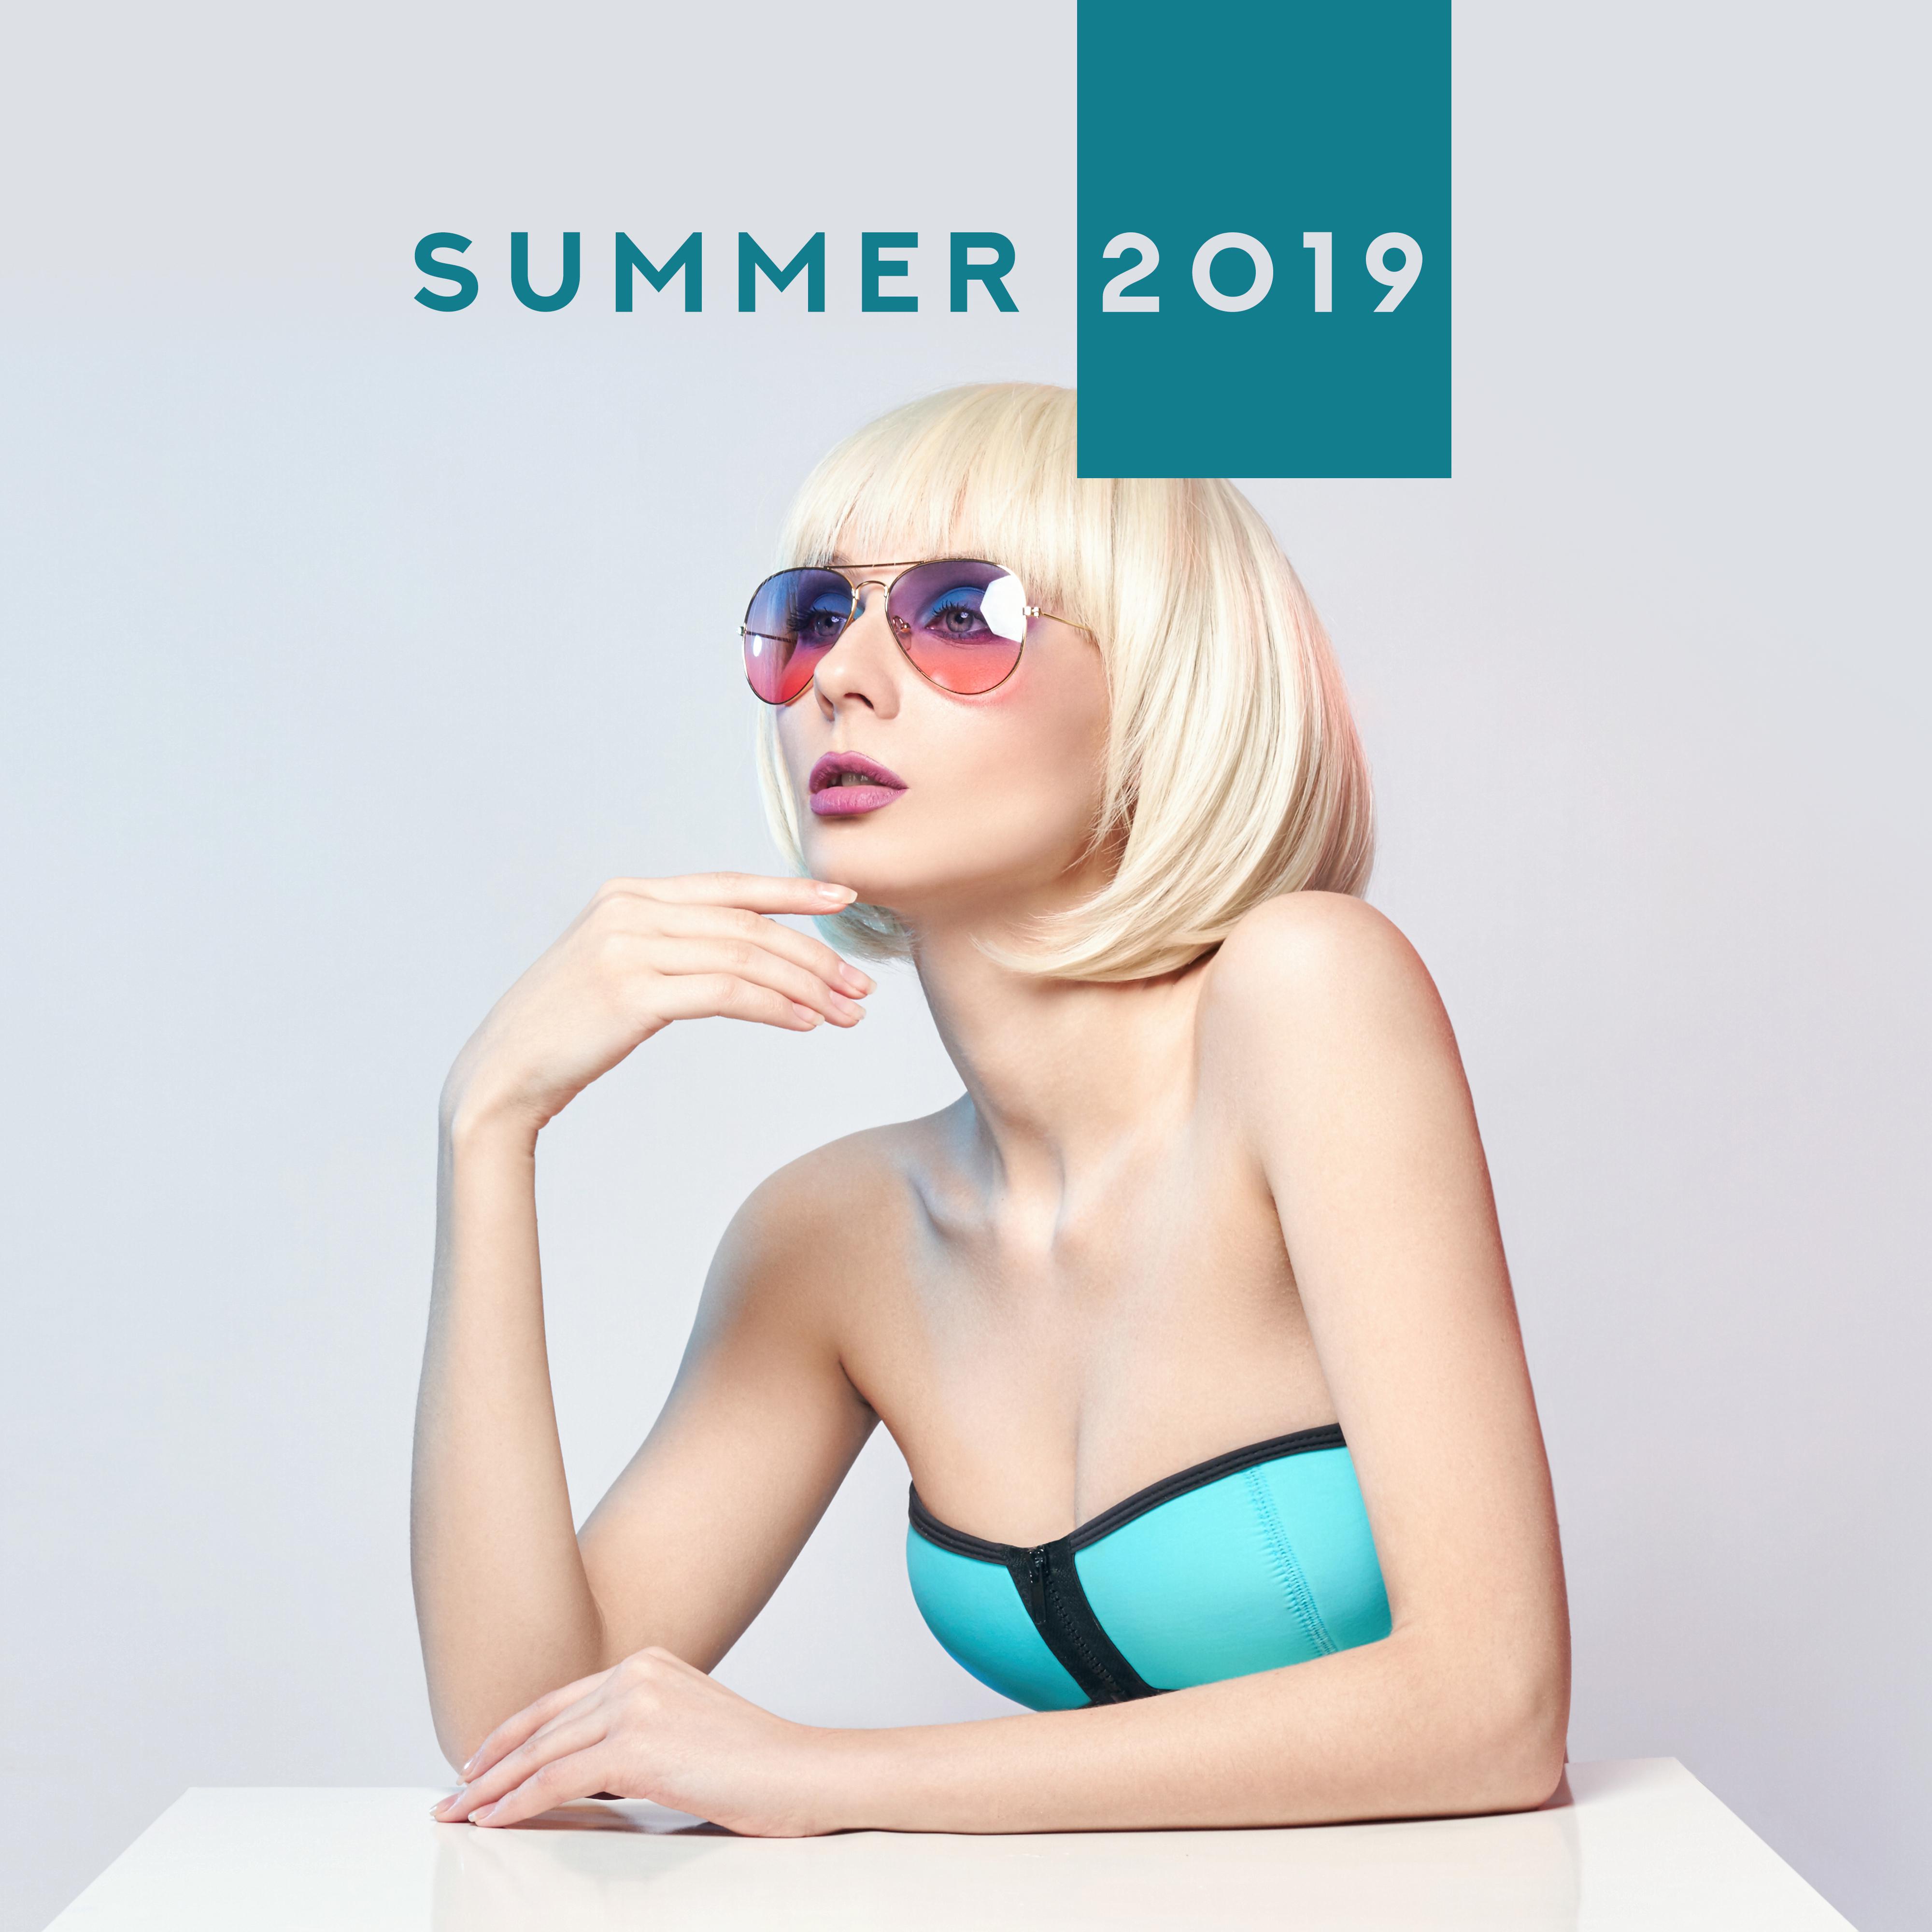 Summer 2019 – Chill Out, Summer Hits 2019, Ibiza Lounge Club